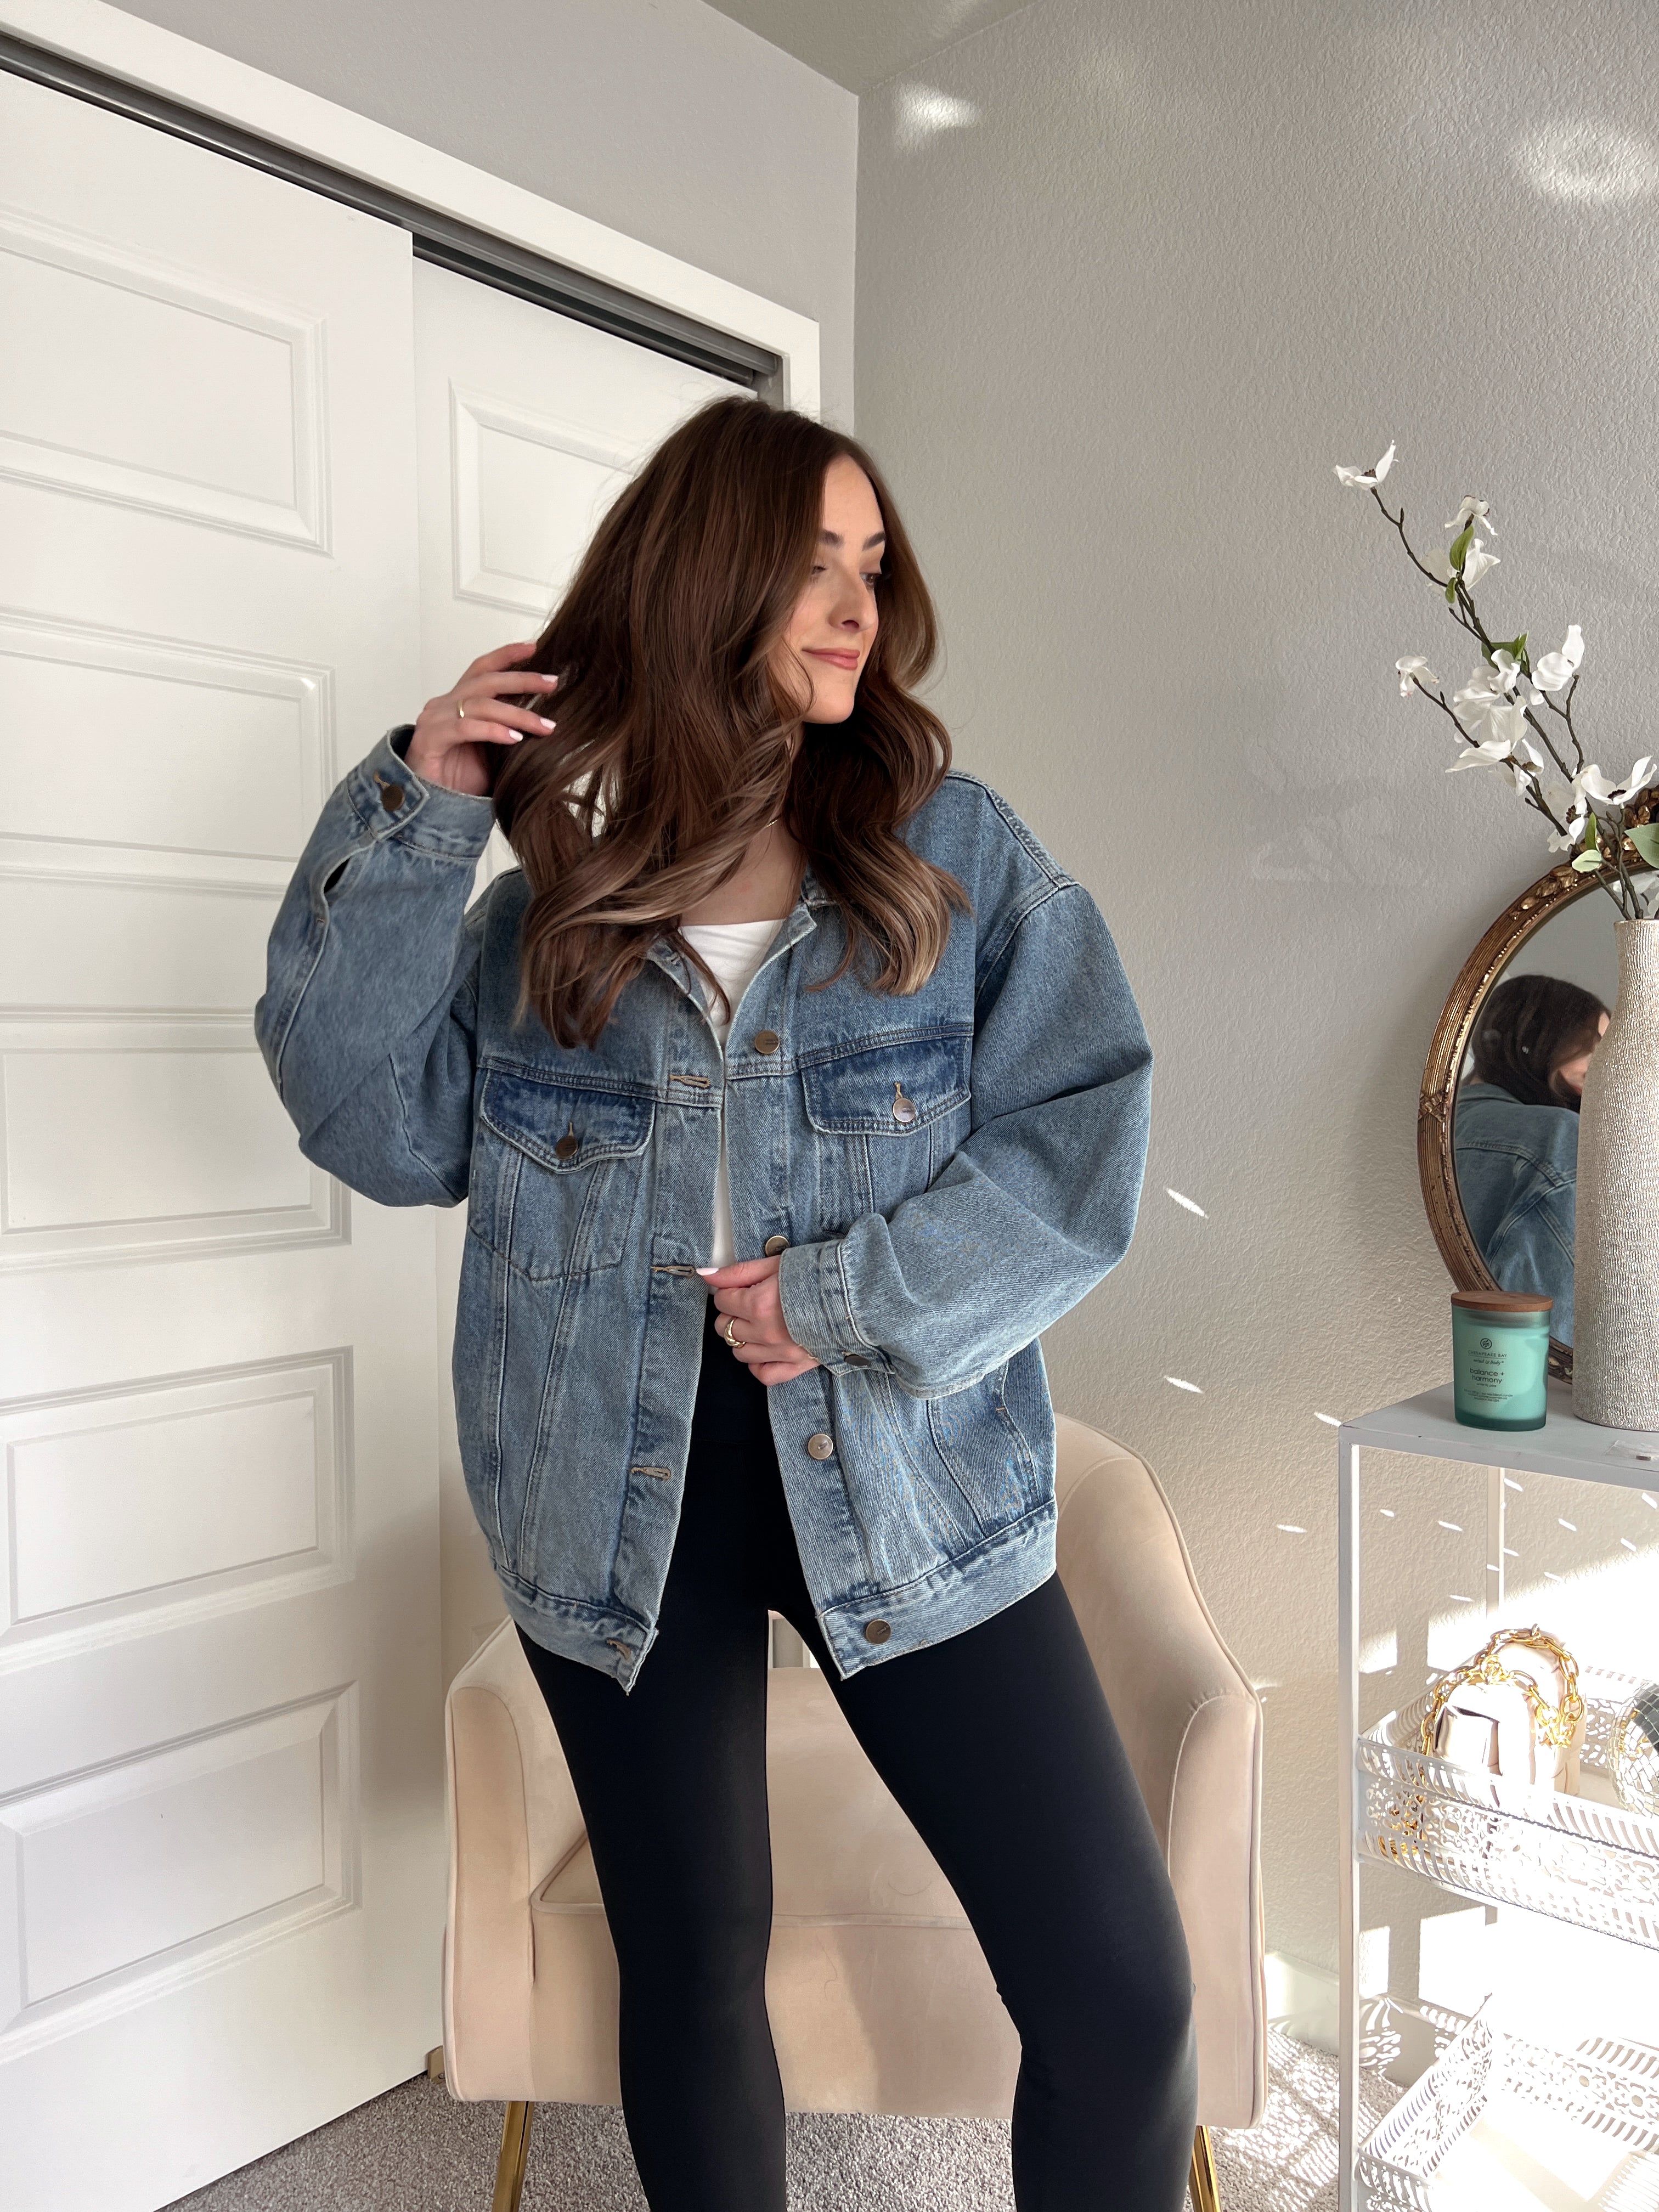 How to Style a Jean Jacket | Vogue